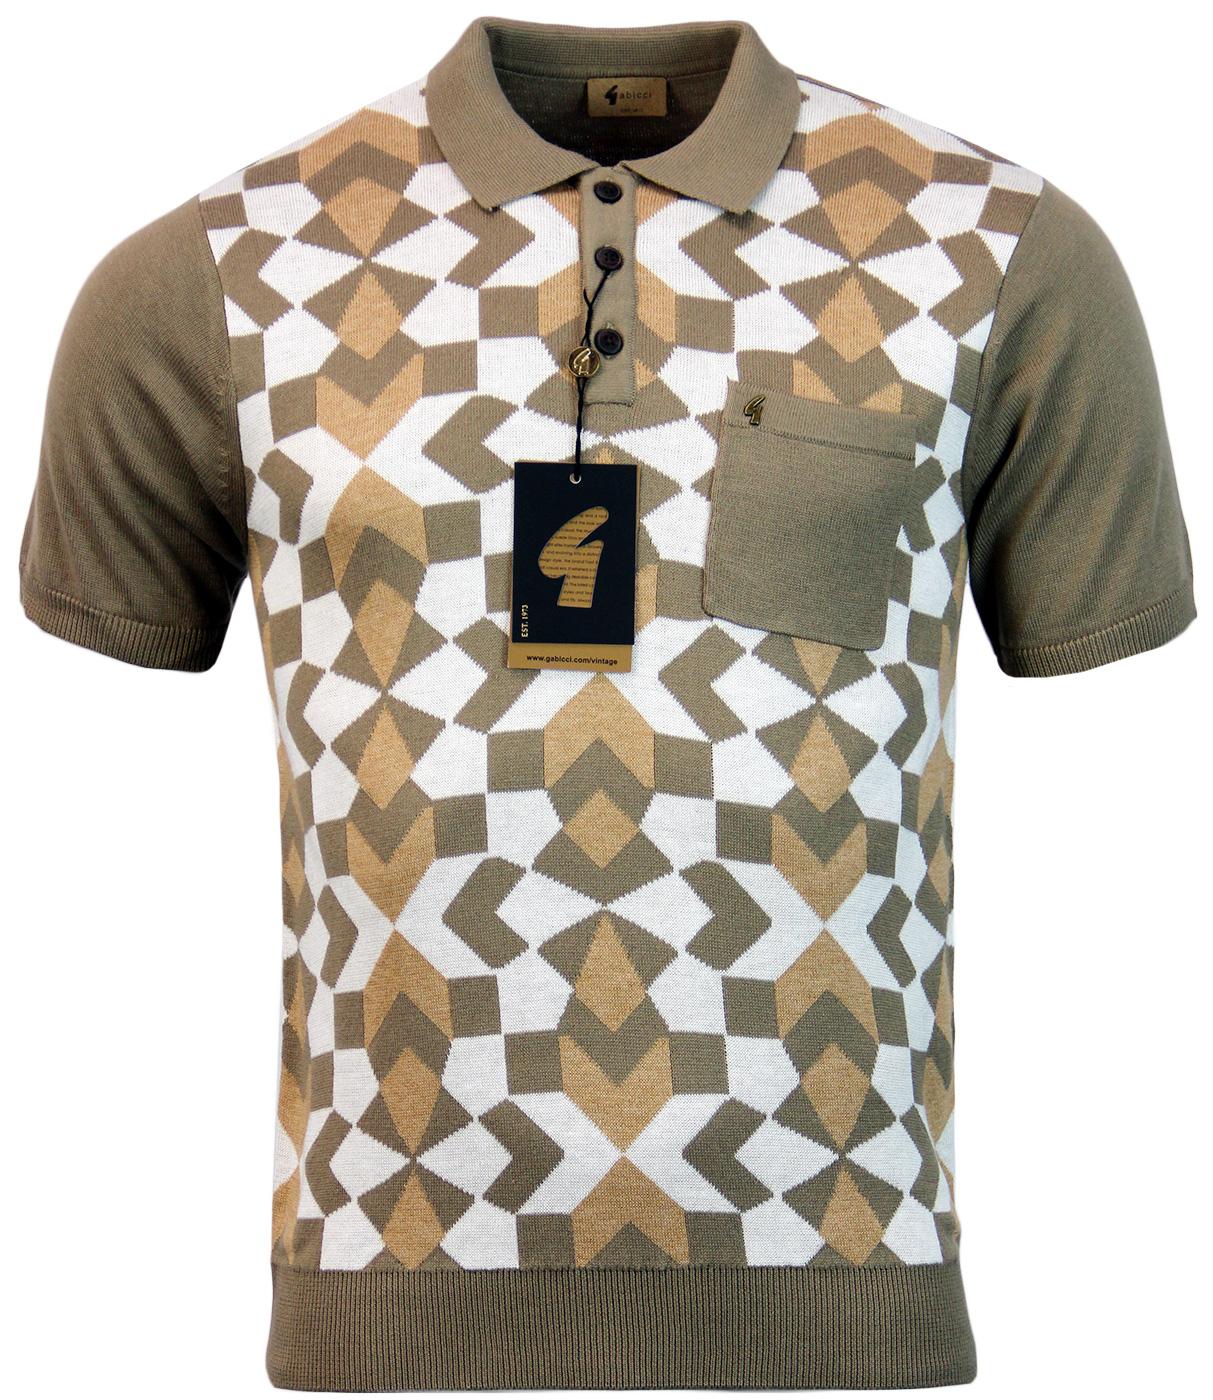 GABICCI VINTAGE Retro Mod Abstract Geo Knit Polo in Earth